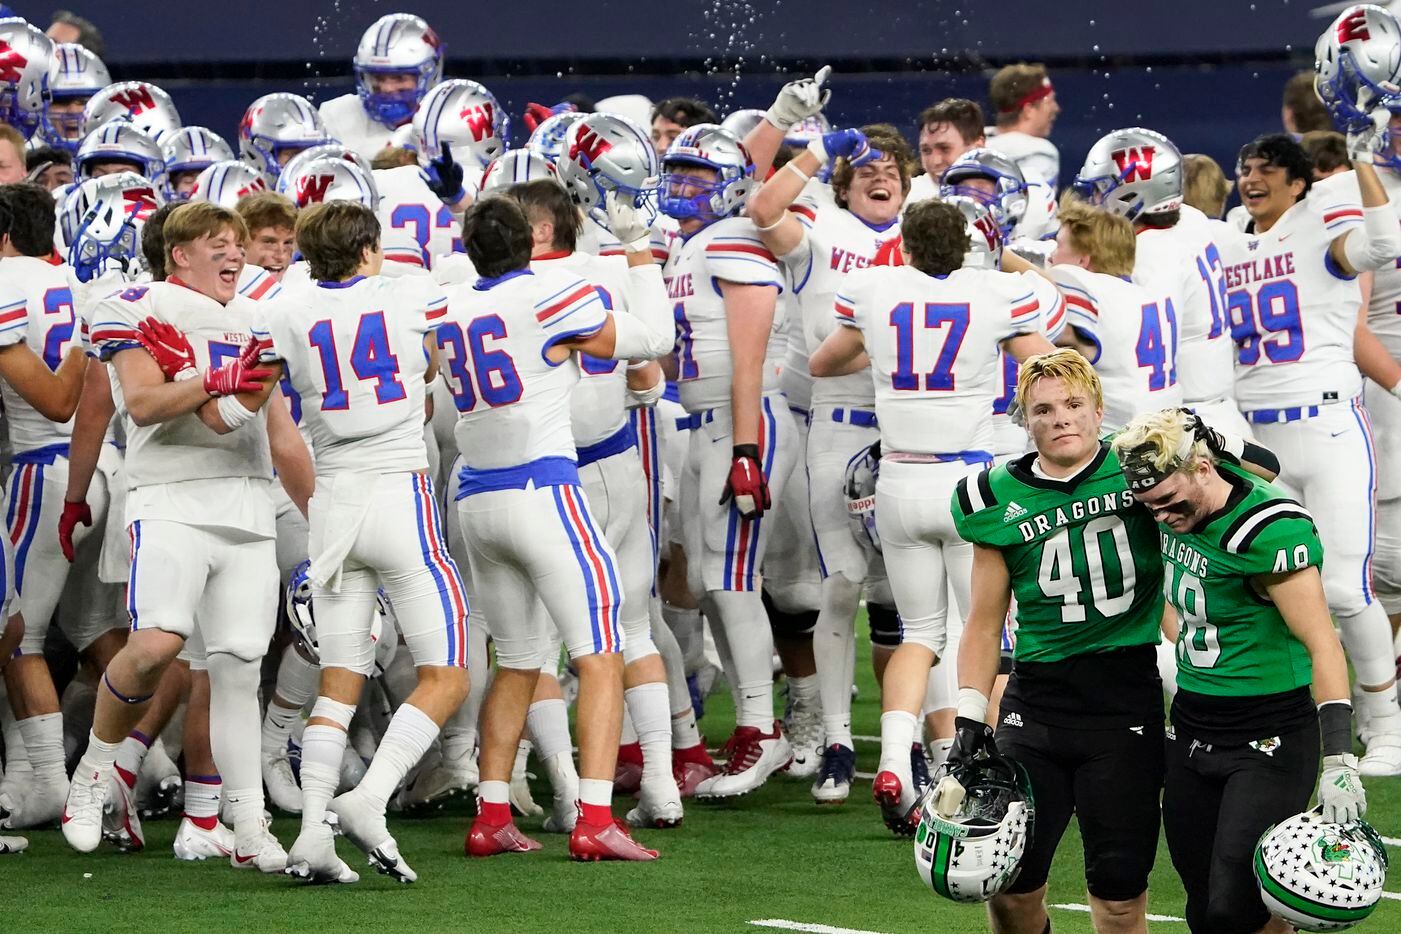 Southlake Carroll linebacker Allan Kleiman (40) consoles linebacker Aiden Peil (48) as the leave the field while Austin Westlake players celebrate after a 52-34 Westlake victory in the Class 6A Division I state football championship game at AT&T Stadium on Saturday, Jan. 16, 2021, in Arlington, Texas. (Smiley N. Pool/The Dallas Morning News)